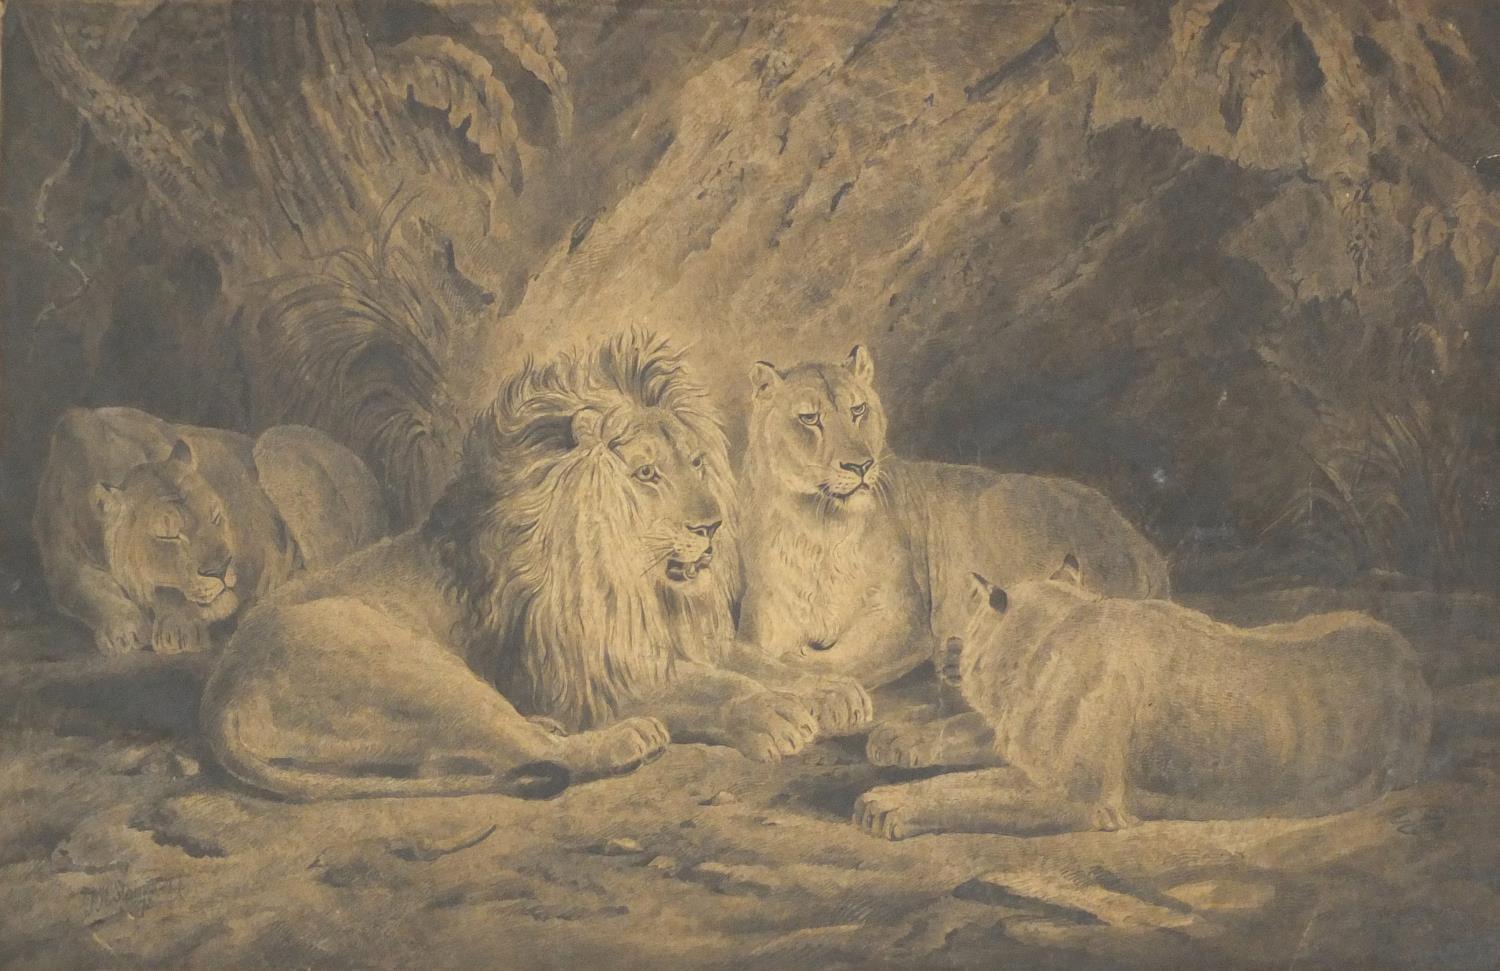 PH Staines 1873 -Well detailed pencil drawing- Pride of Lions, 56cm x 35cm : For Condition Reports